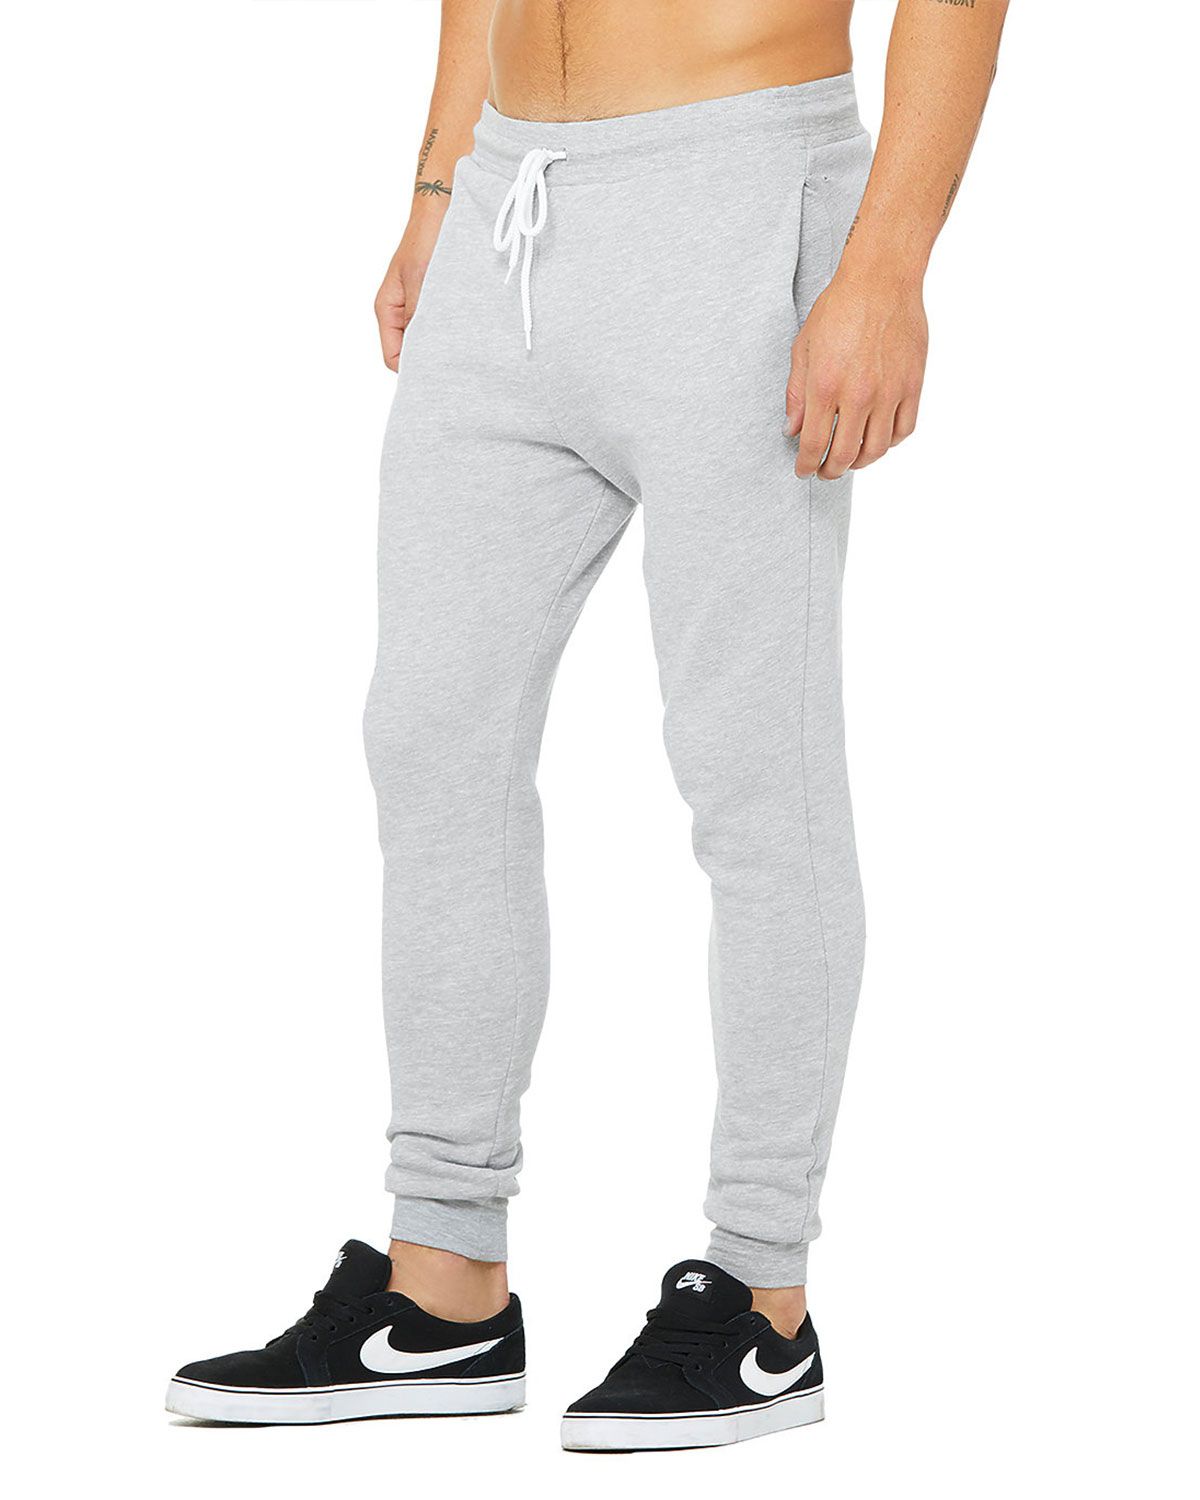 Bella + Canvas 3727 Unisex Jogger Sweatpant - Free Shipping Available